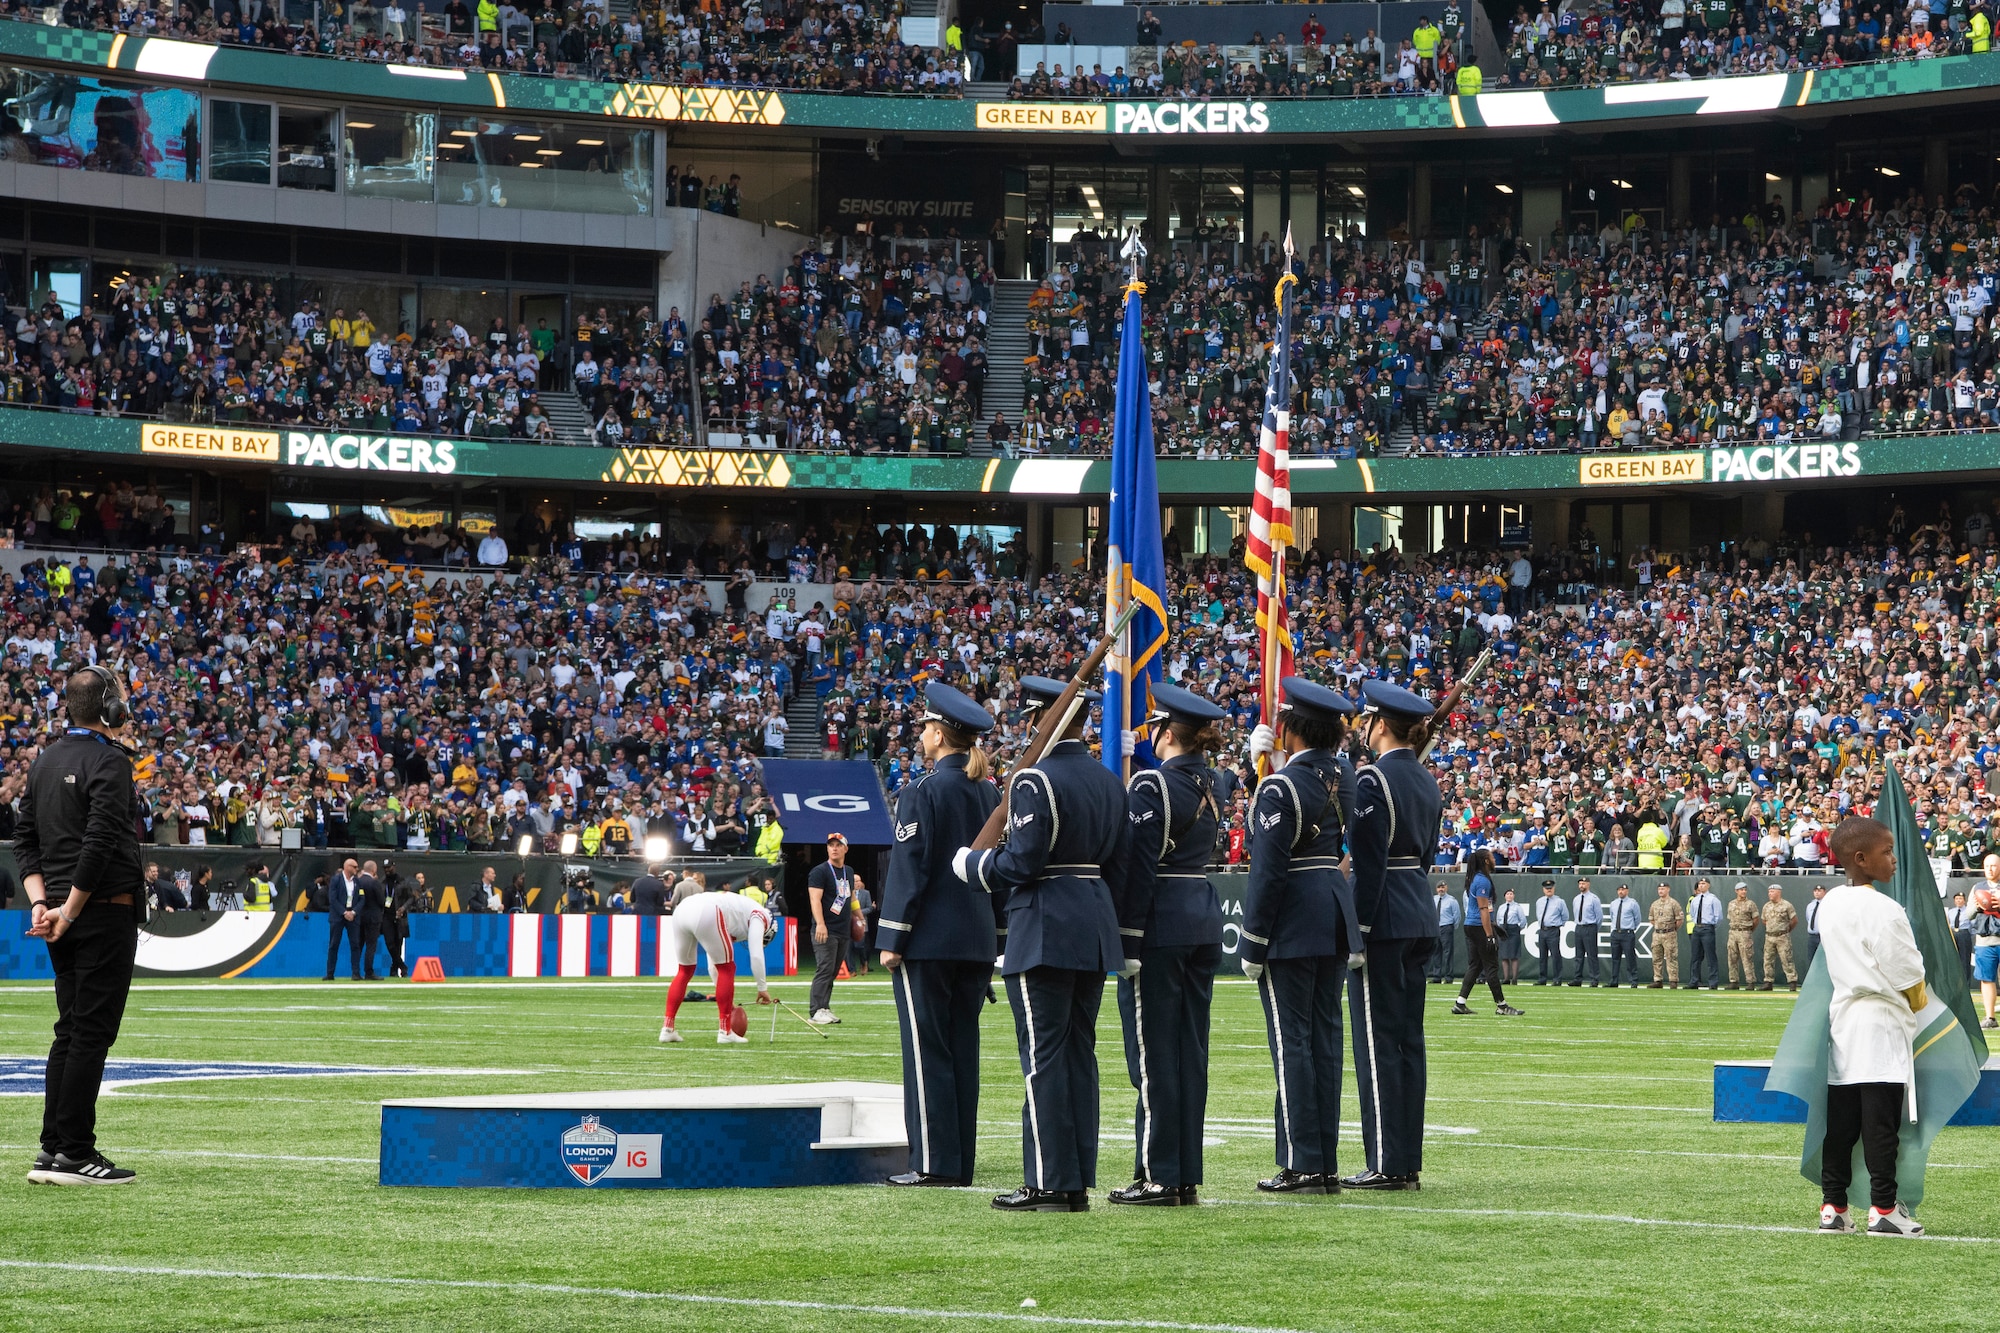 U.S. Air Force Staff Sgt. Michelle Doolittle, U.S. Air Forces in Europe Band vocalist, stands in front of the 48th Fighter Wing Honor Guard before singing the U.S. National Anthem during the pre-game ceremony of the National Football League’s New York Giants vs. Green Bay Packers game at Tottenham Hotspur Stadium, in London, England, Oct. 9, 2022. As part of the pre-game ceremony, Airmen presented a U.S. Flag alongside a U.K. flag presented by British service members. The Giants defeated the Packers 27-22. (U.S. Air Force photo by Tech. Sgt. Anthony Hetlage)